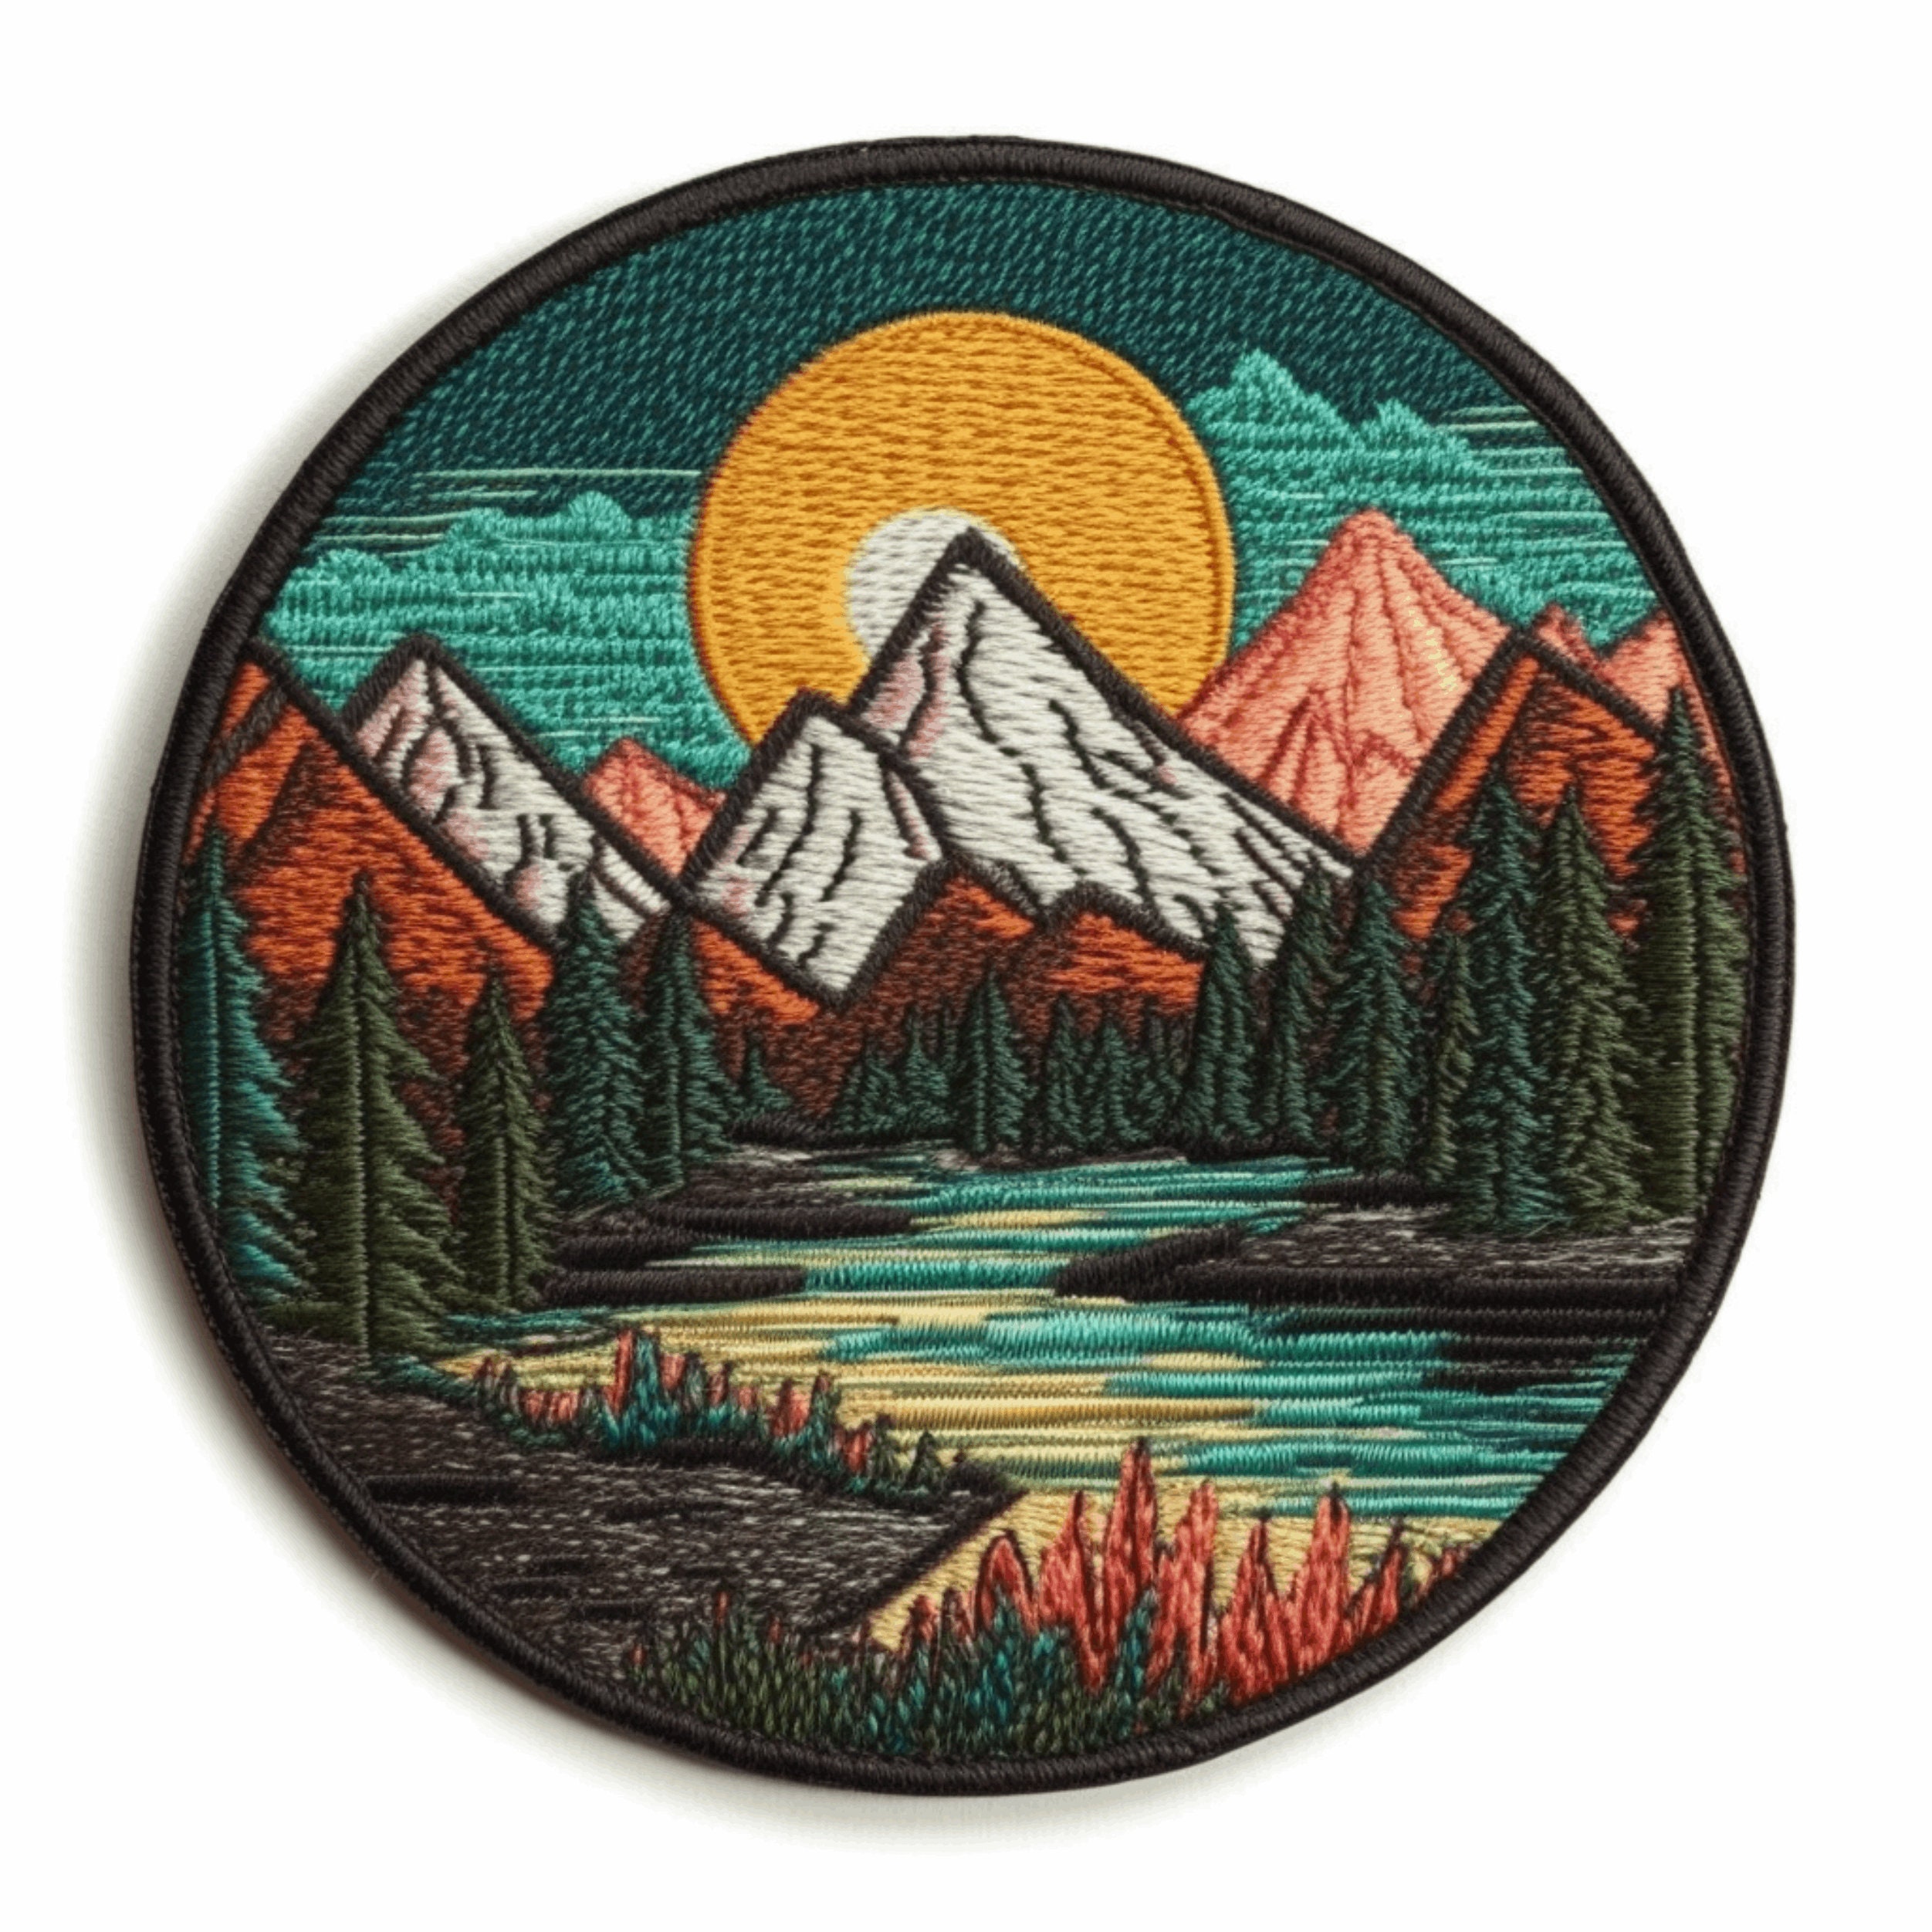 Mountain Patch Iron-on/sew-on Applique for Clothing Jacket Vest